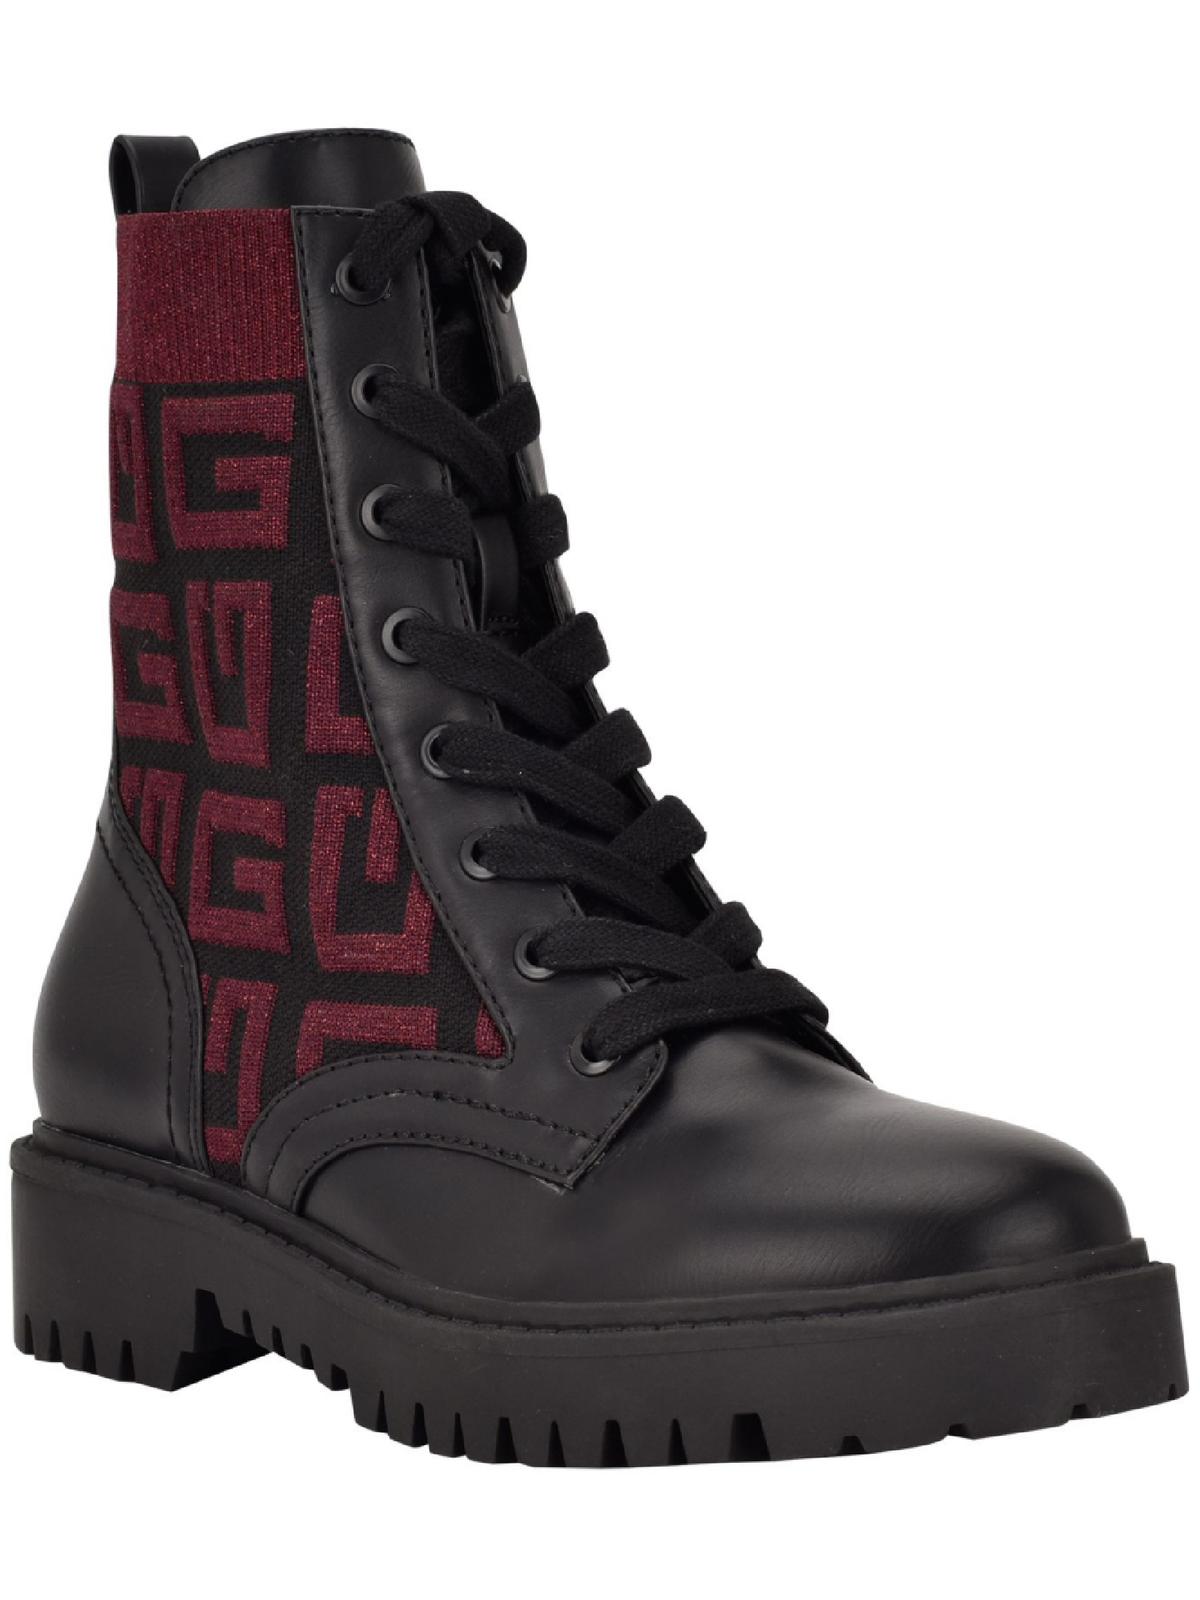 Guess Womens Olinia Faux Leather Platform Combat & Lace-up Boots - image 1 of 3